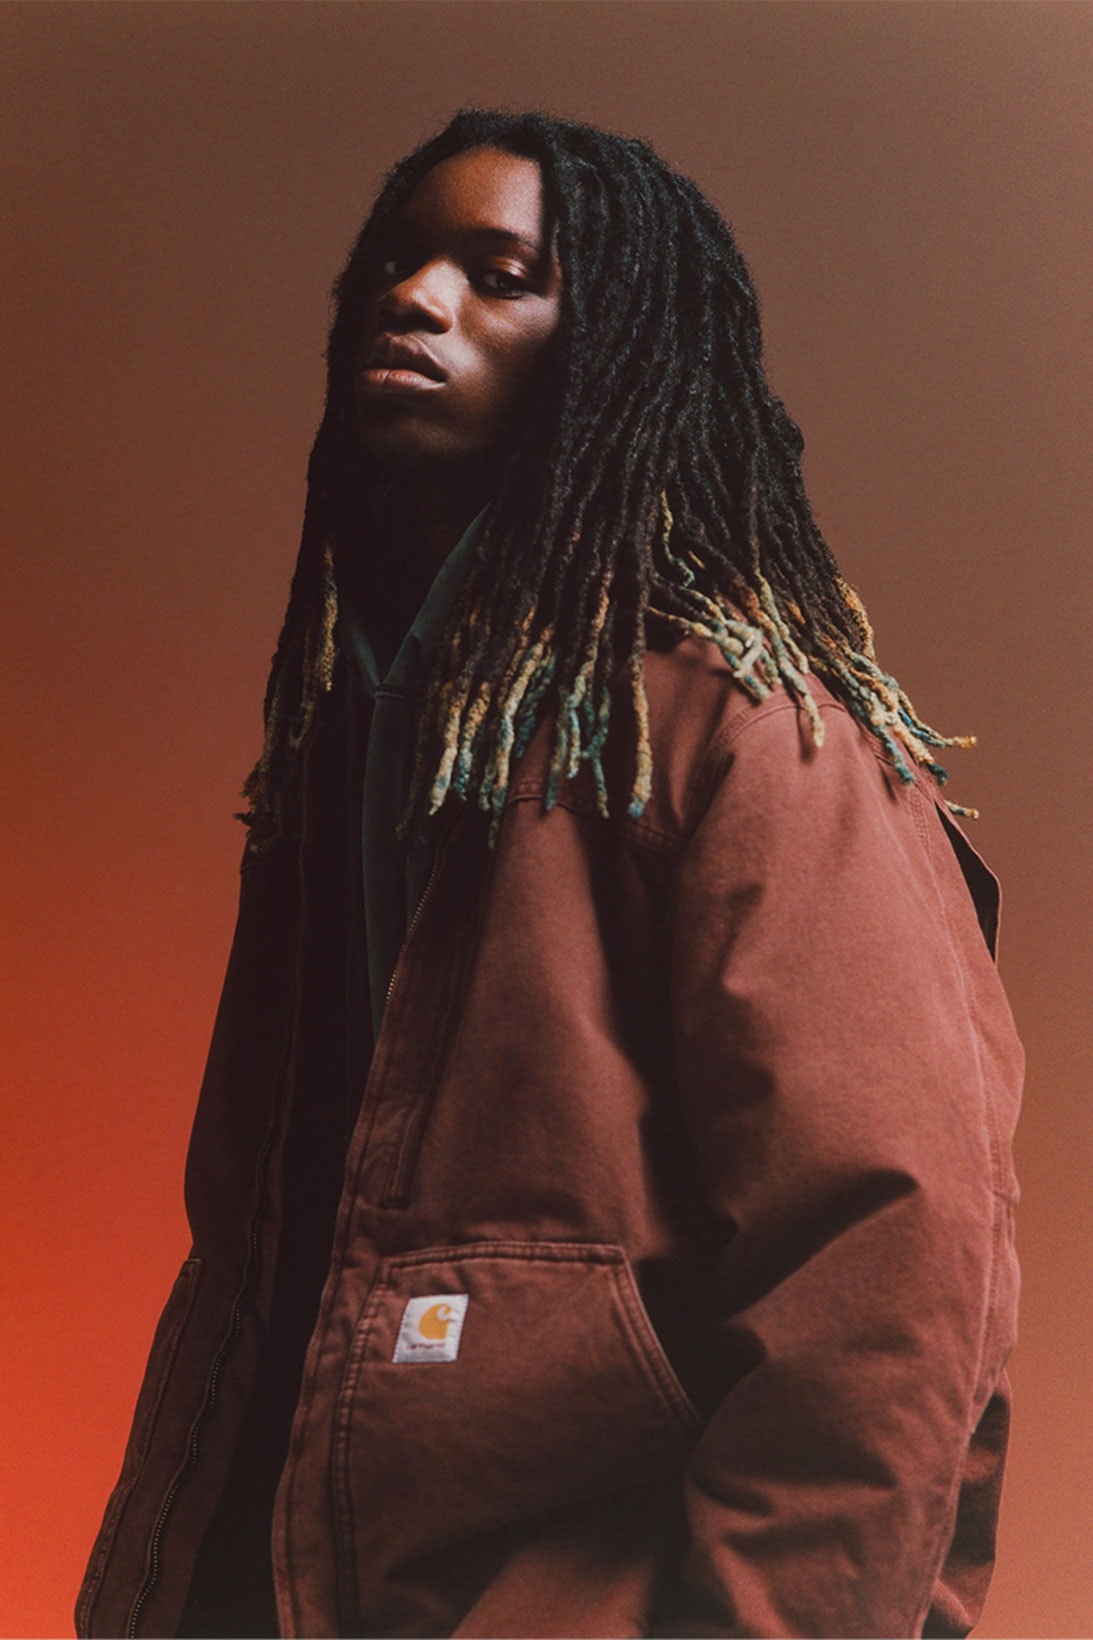 Carhartt WIP Fall Winter Collection Lookbook Release Images